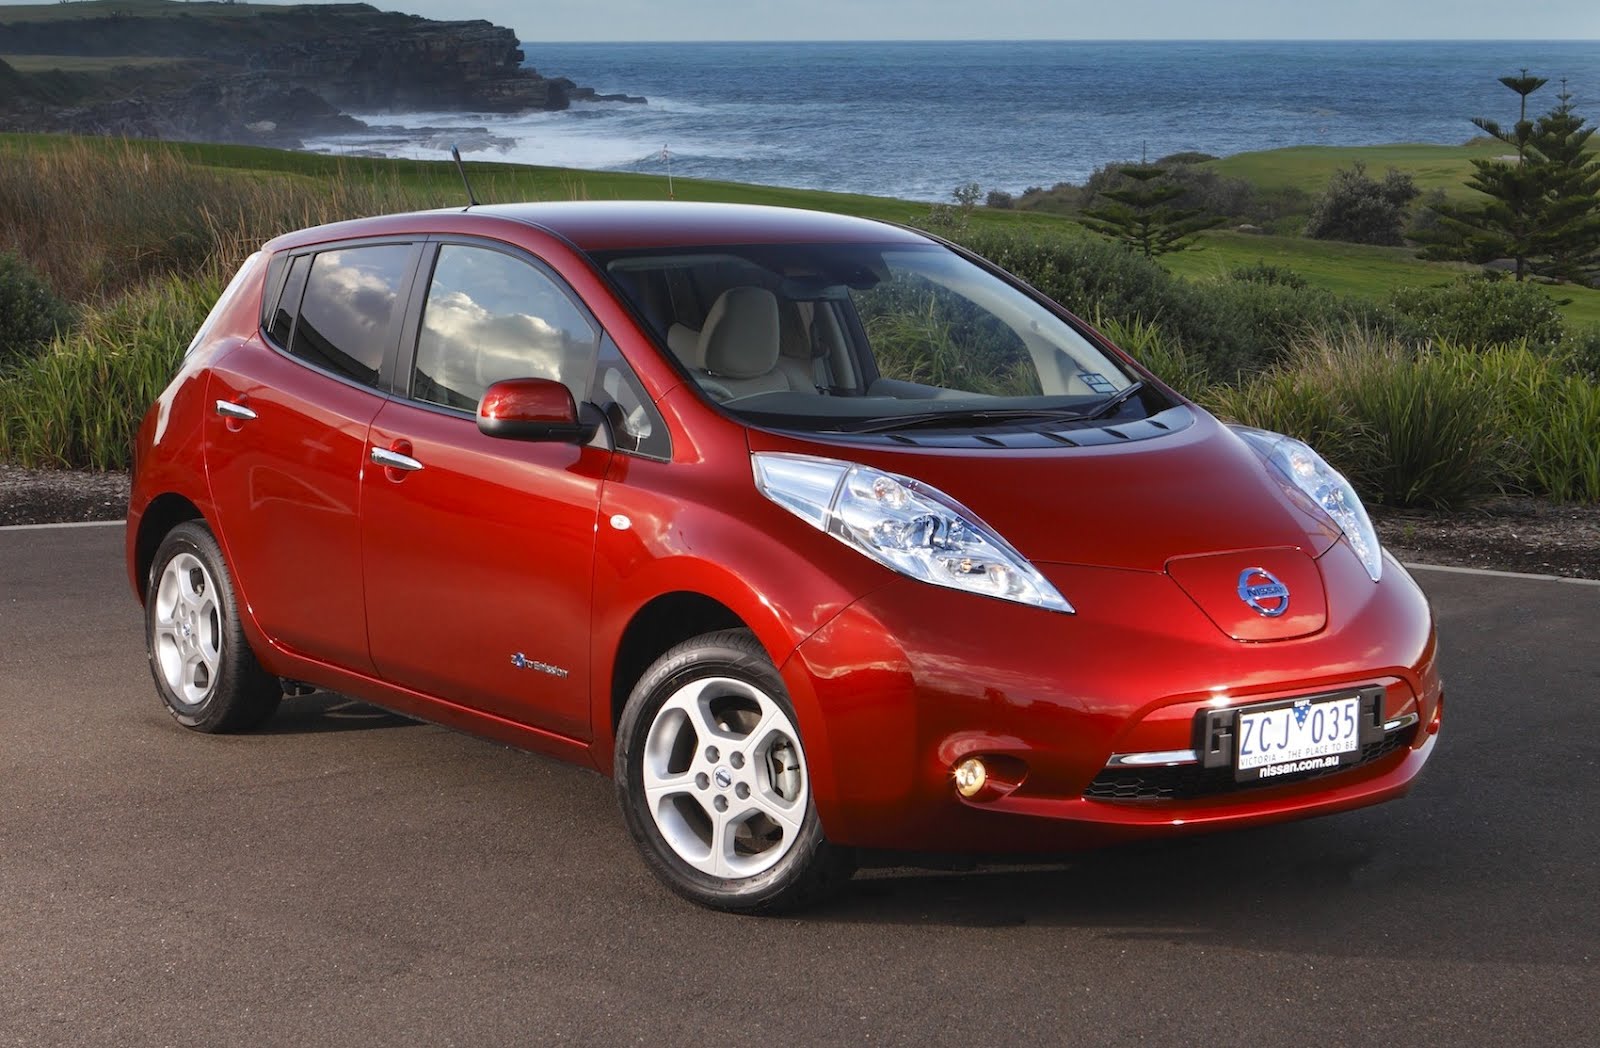 nissan-offers-leaf-discounts-to-spur-sales-electric-vehicle-news